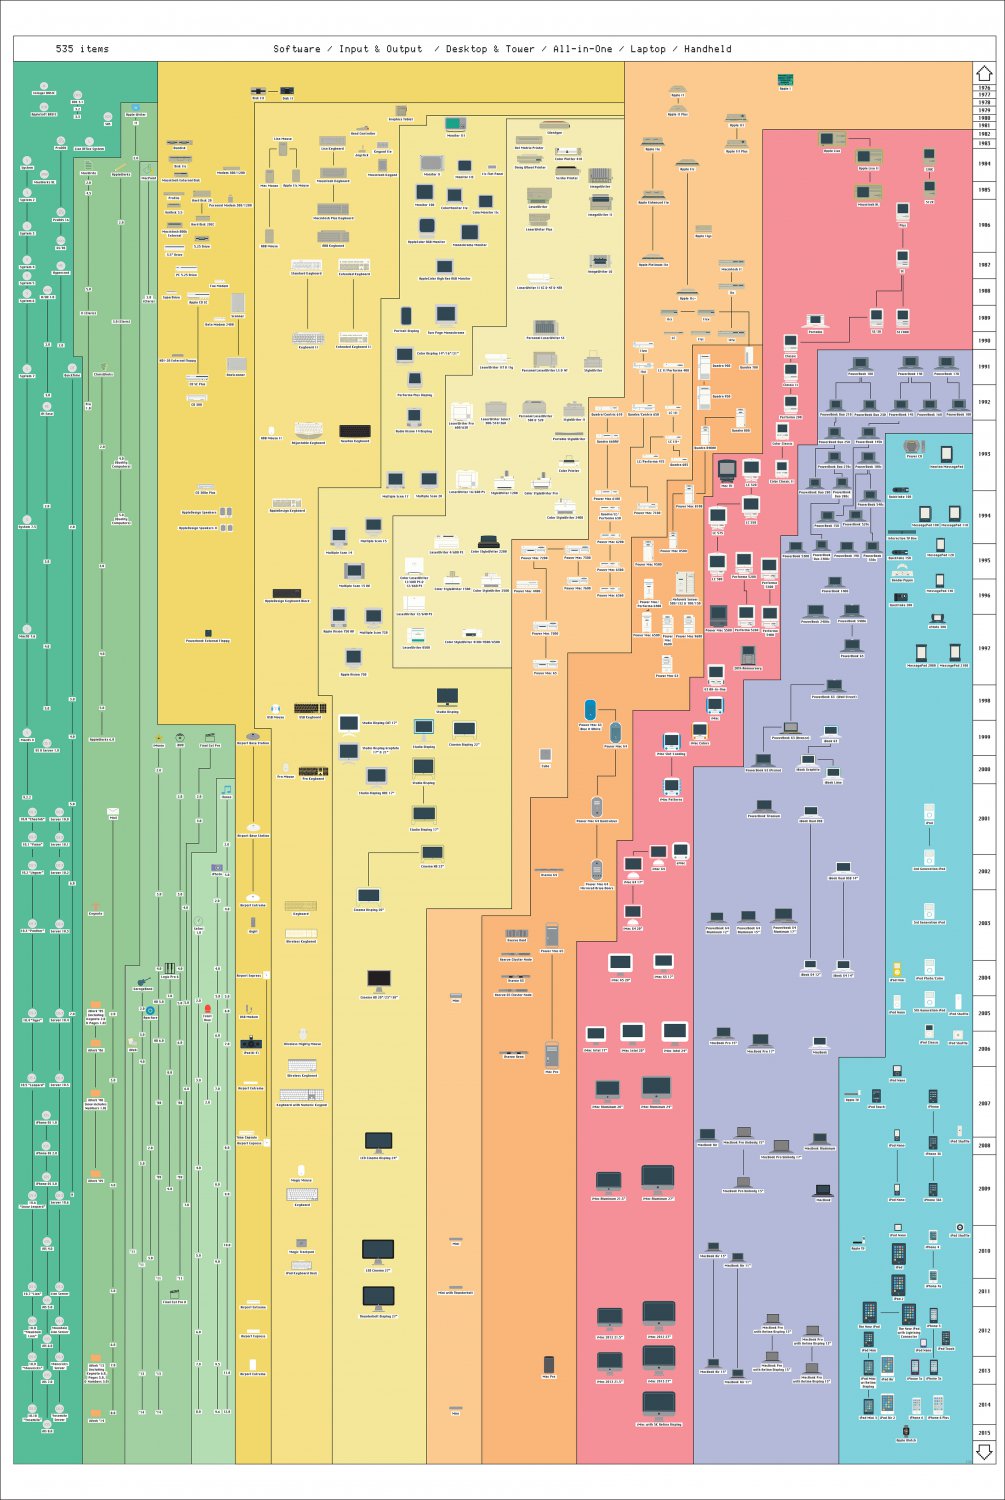 The Great History of Apple Chart  18"x28" (45cm/70cm) Poster